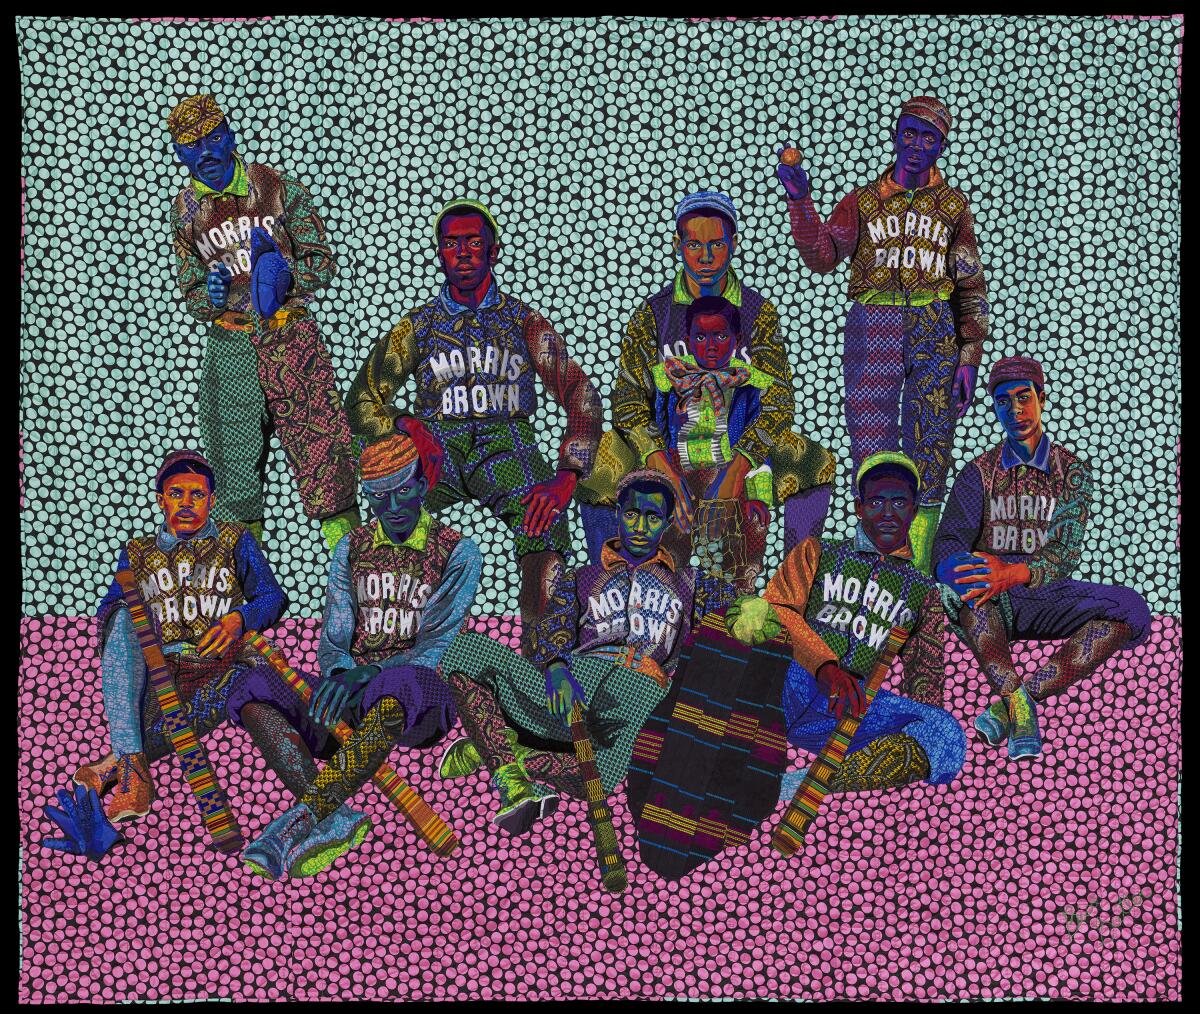 Colorful quilt with men wearing jackets that say "Morris grown"